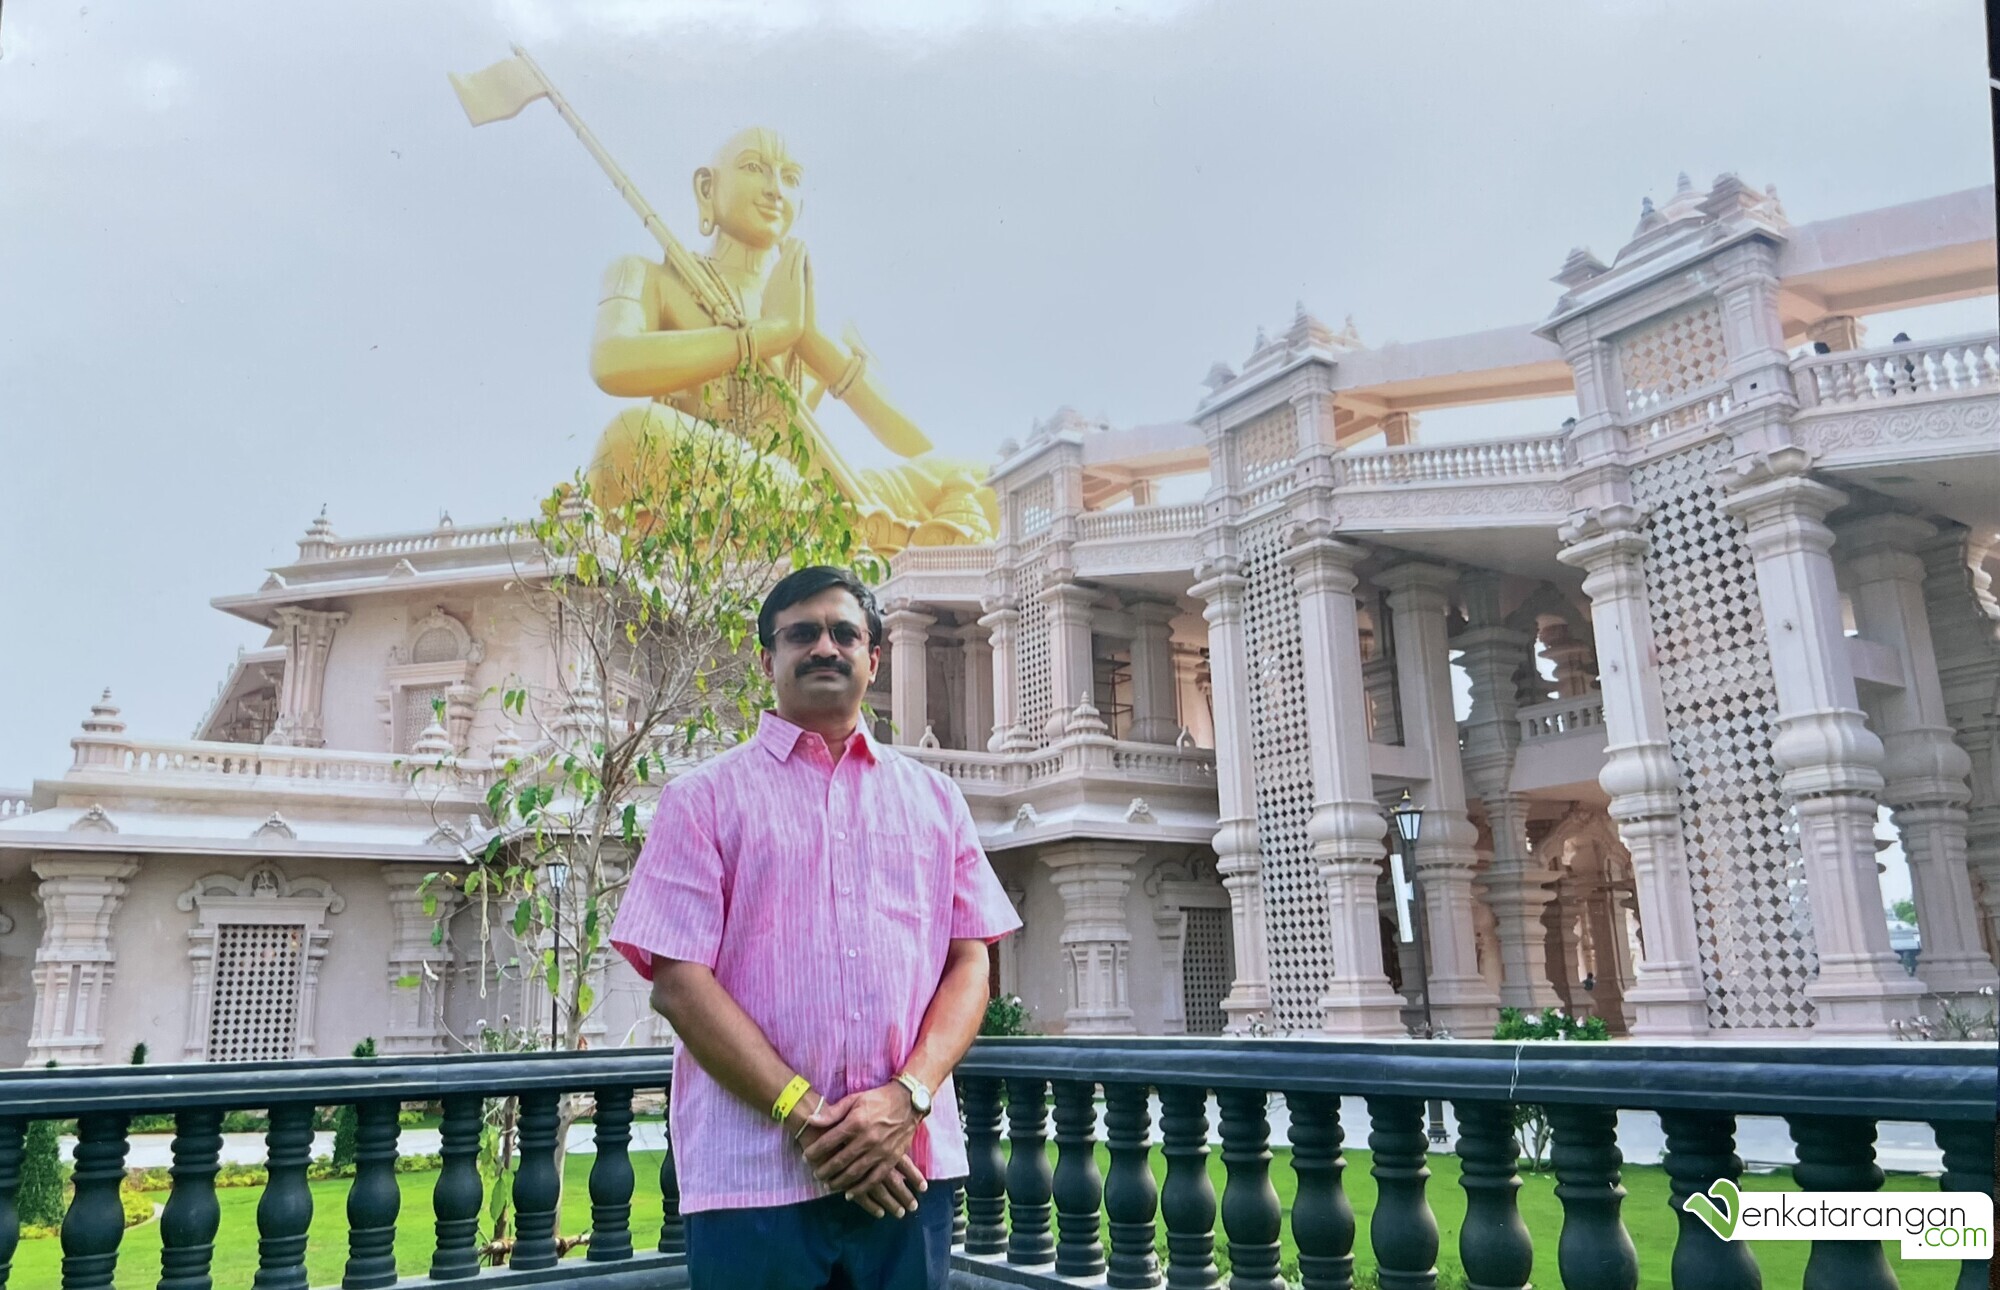 Venkatarangan in front of the Statue of Equaliy - Paid ₹200 for the picture